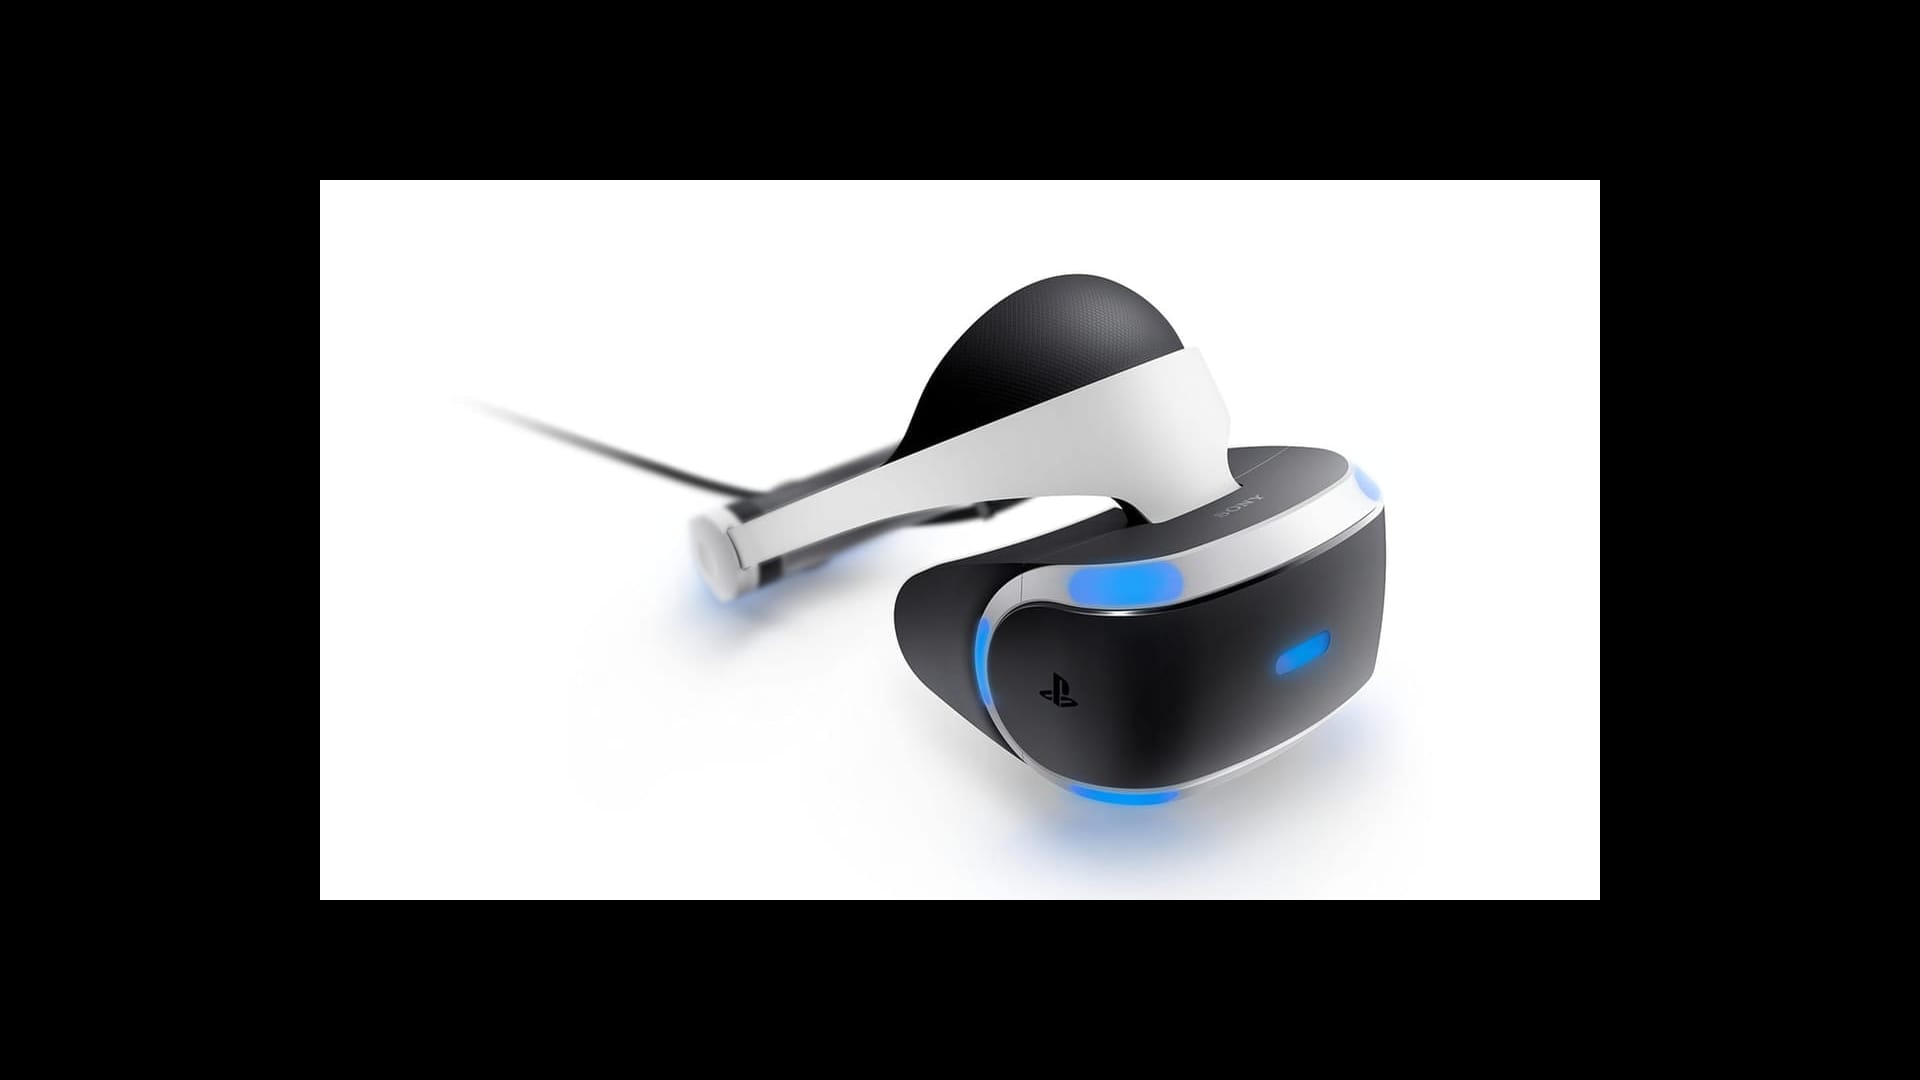 Two PlayStation VR Bundles Are Getting Price Cuts | TechRaptor